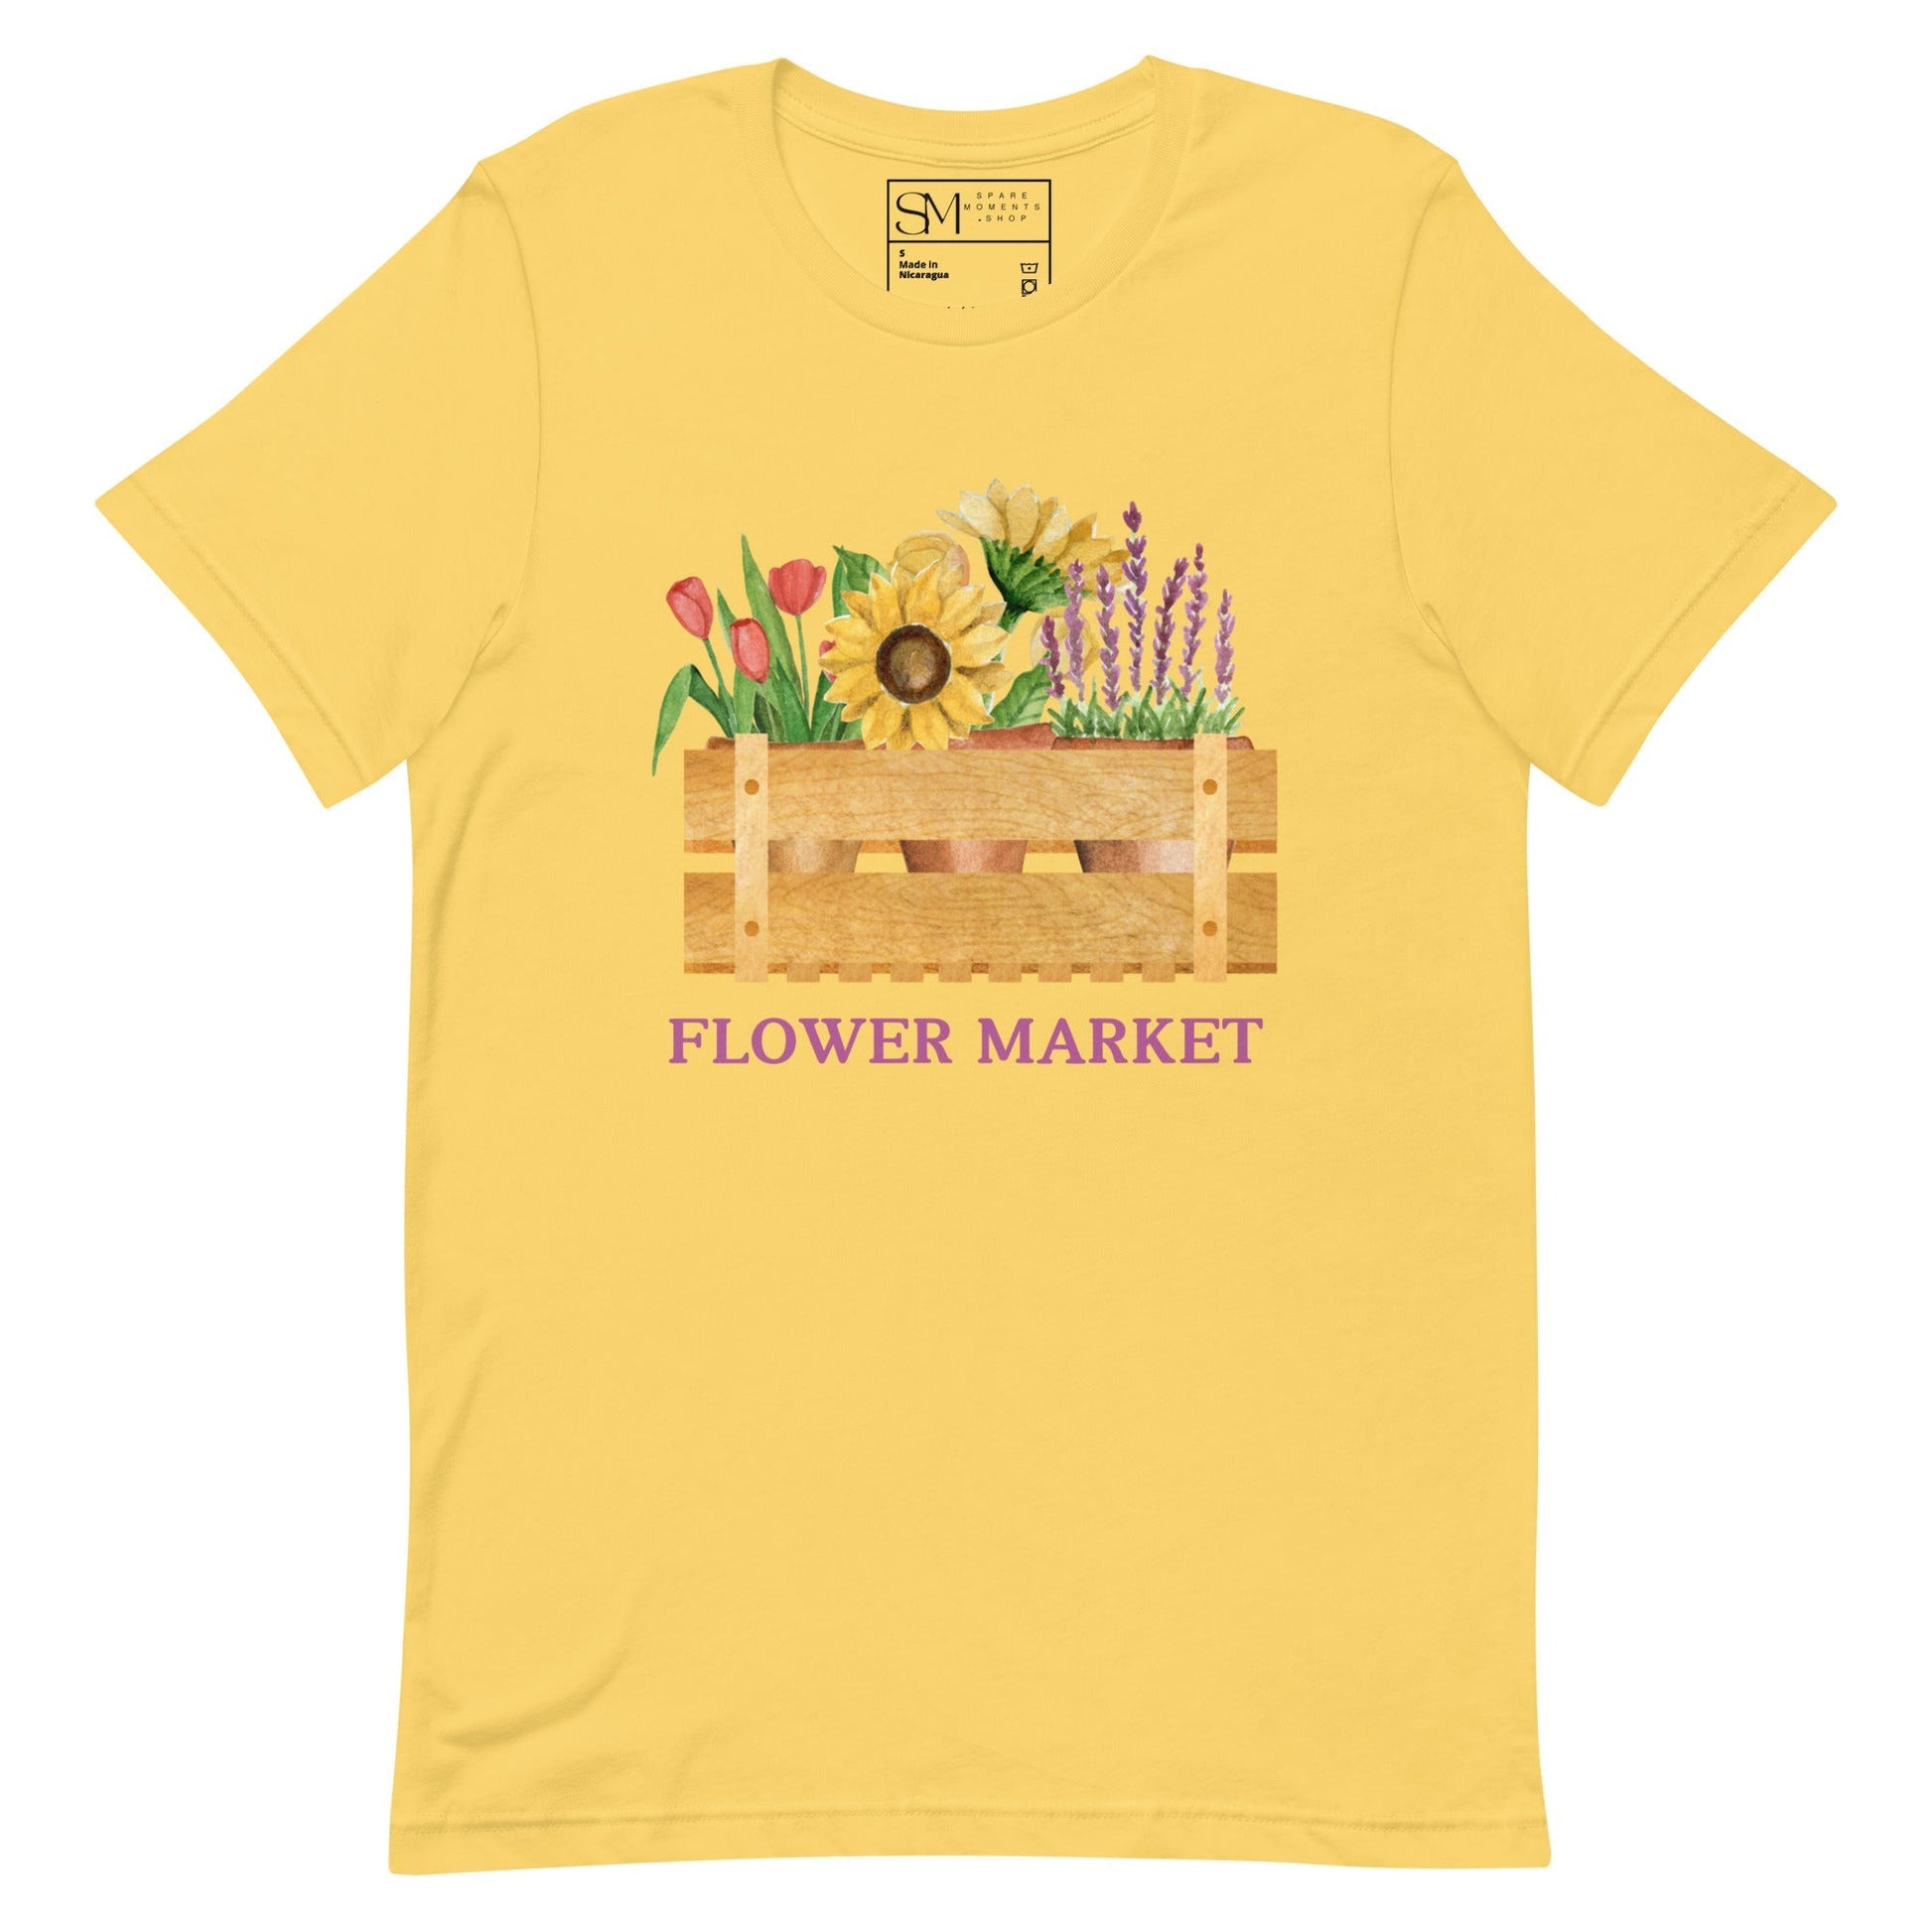 Flower T - Shirt For The Perfect Spring Look